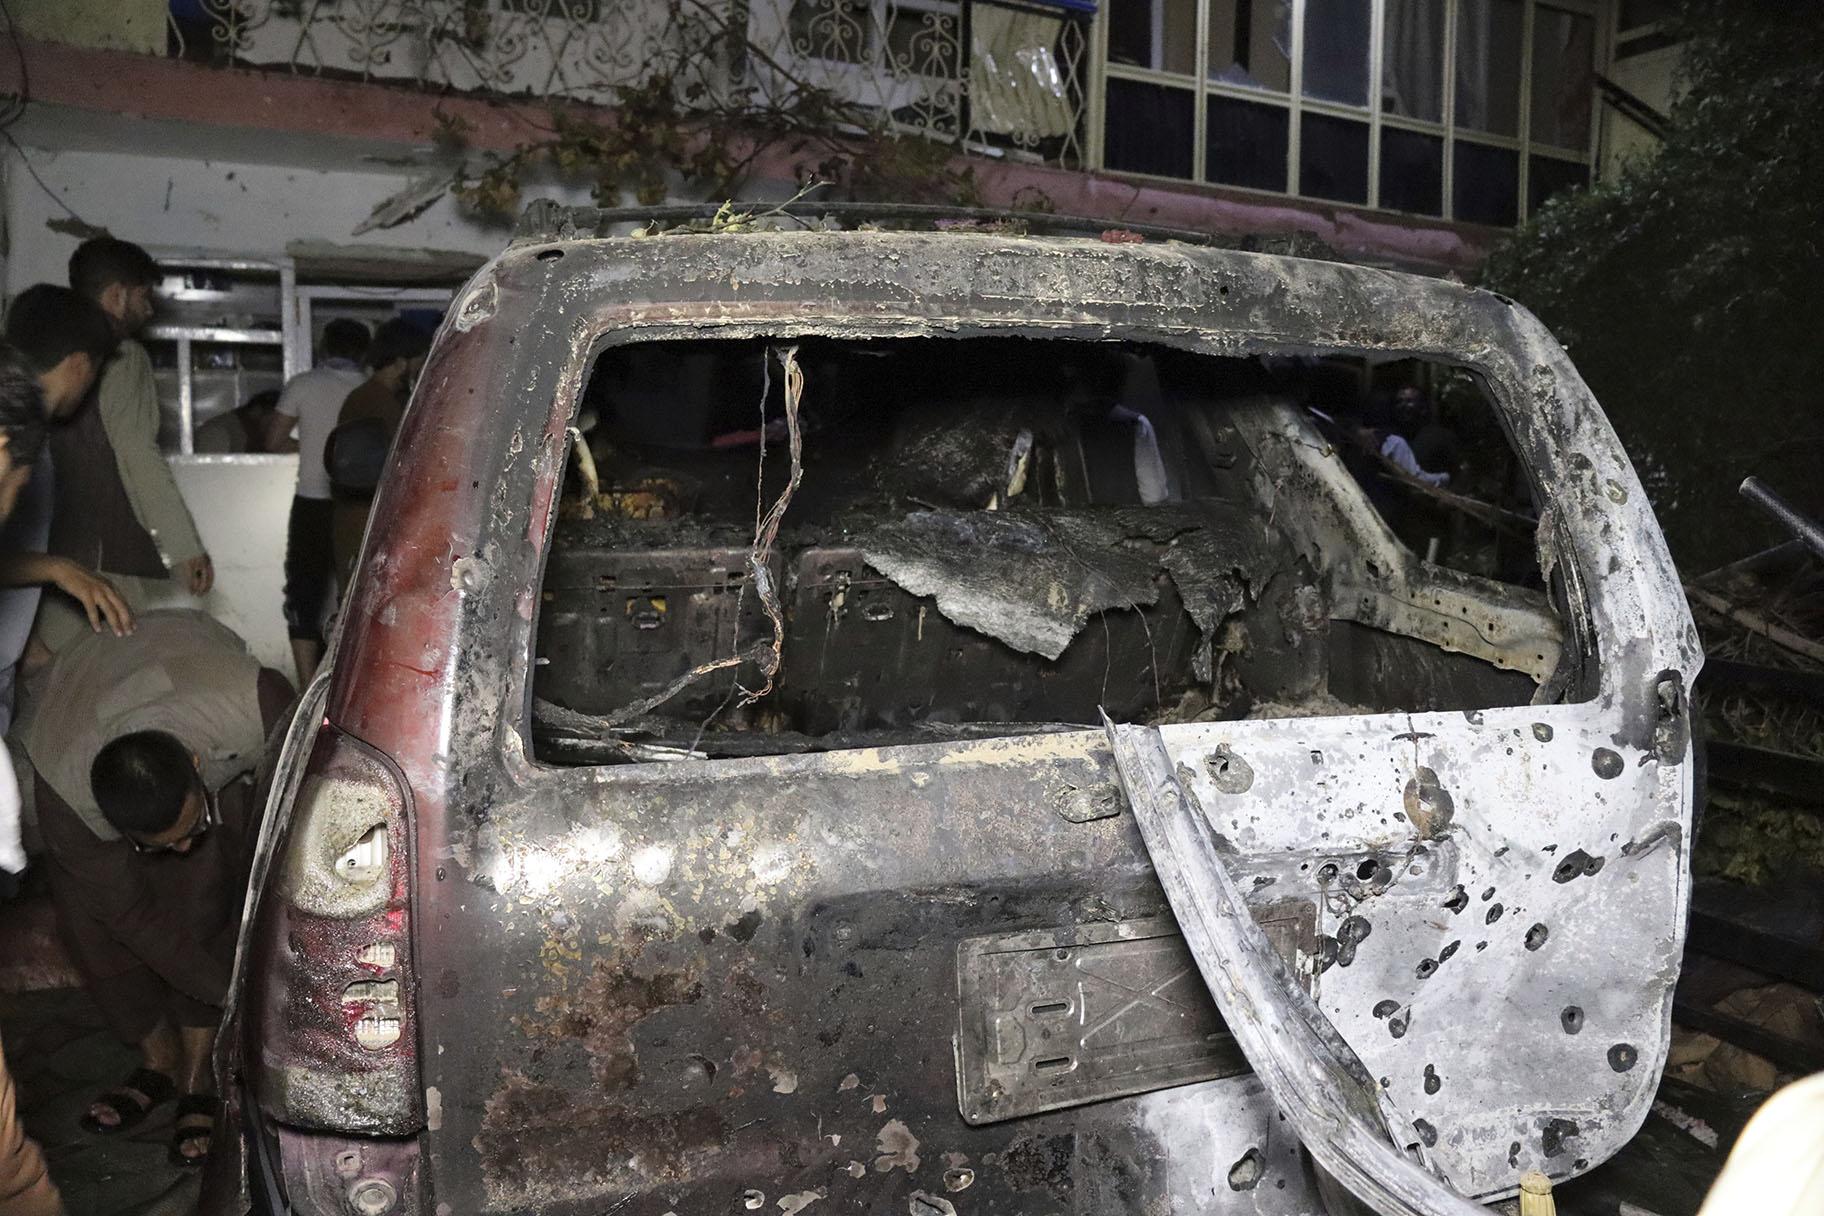 A destroyed vehicle is seen inside a house after a U.S. drone strike in Kabul, Afghanistan, Sunday, Aug. 29, 2021. (AP Photo / Khwaja Tawfiq Sediqi)